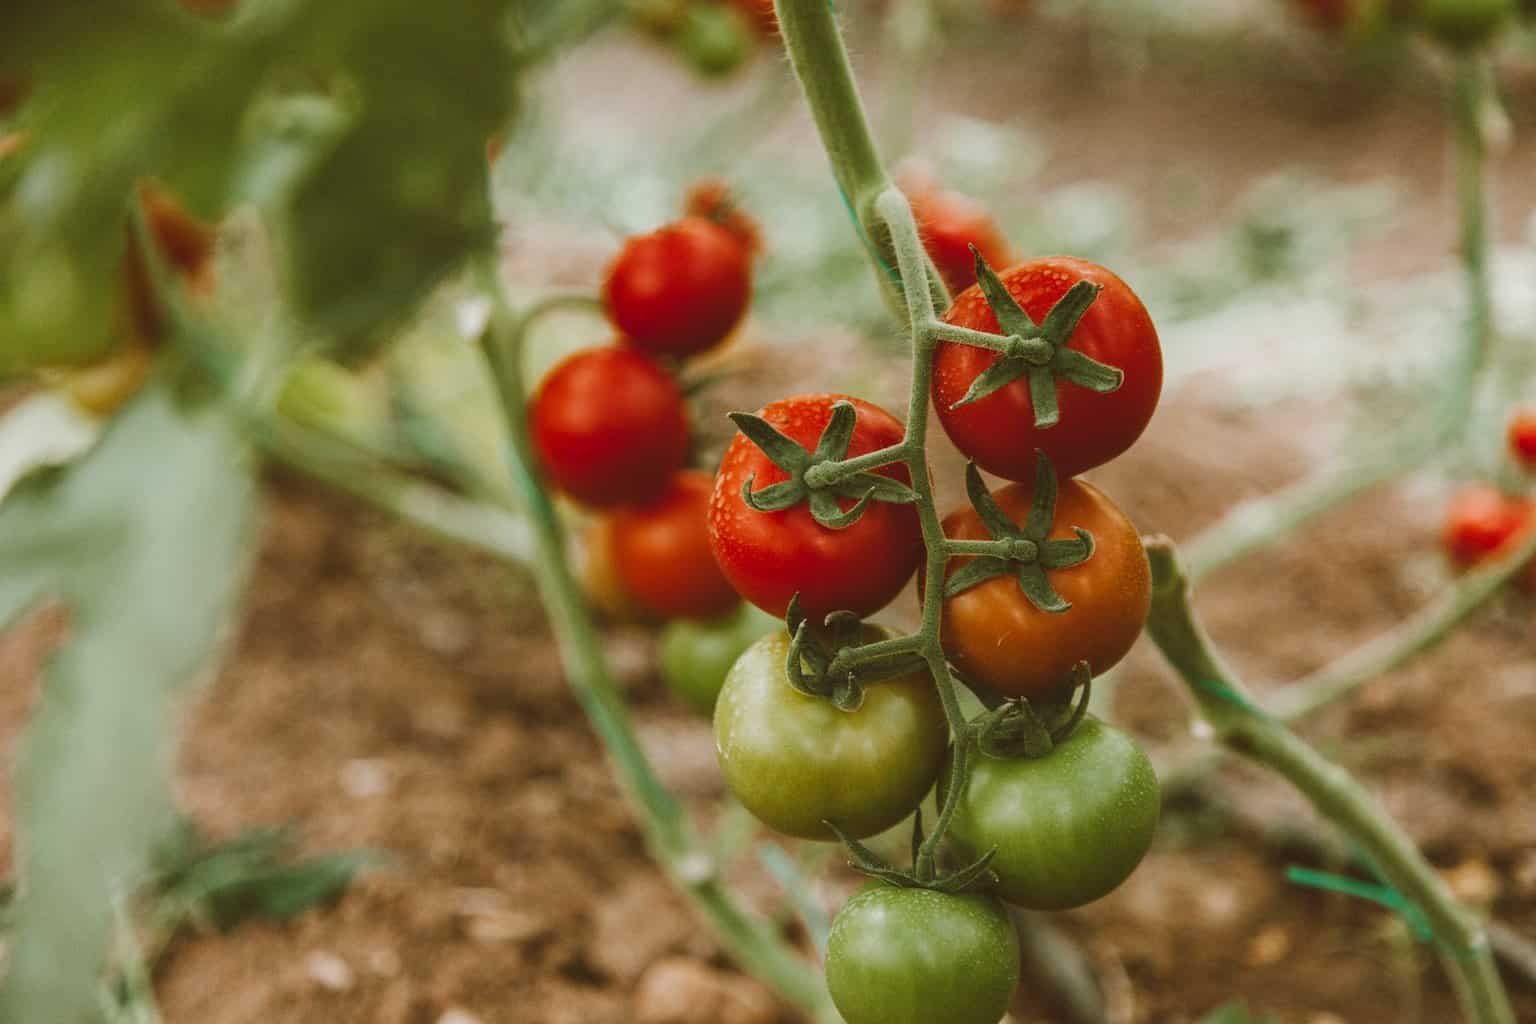 red and green tomato fruits - ways to make your garden as eco-friendly as possible